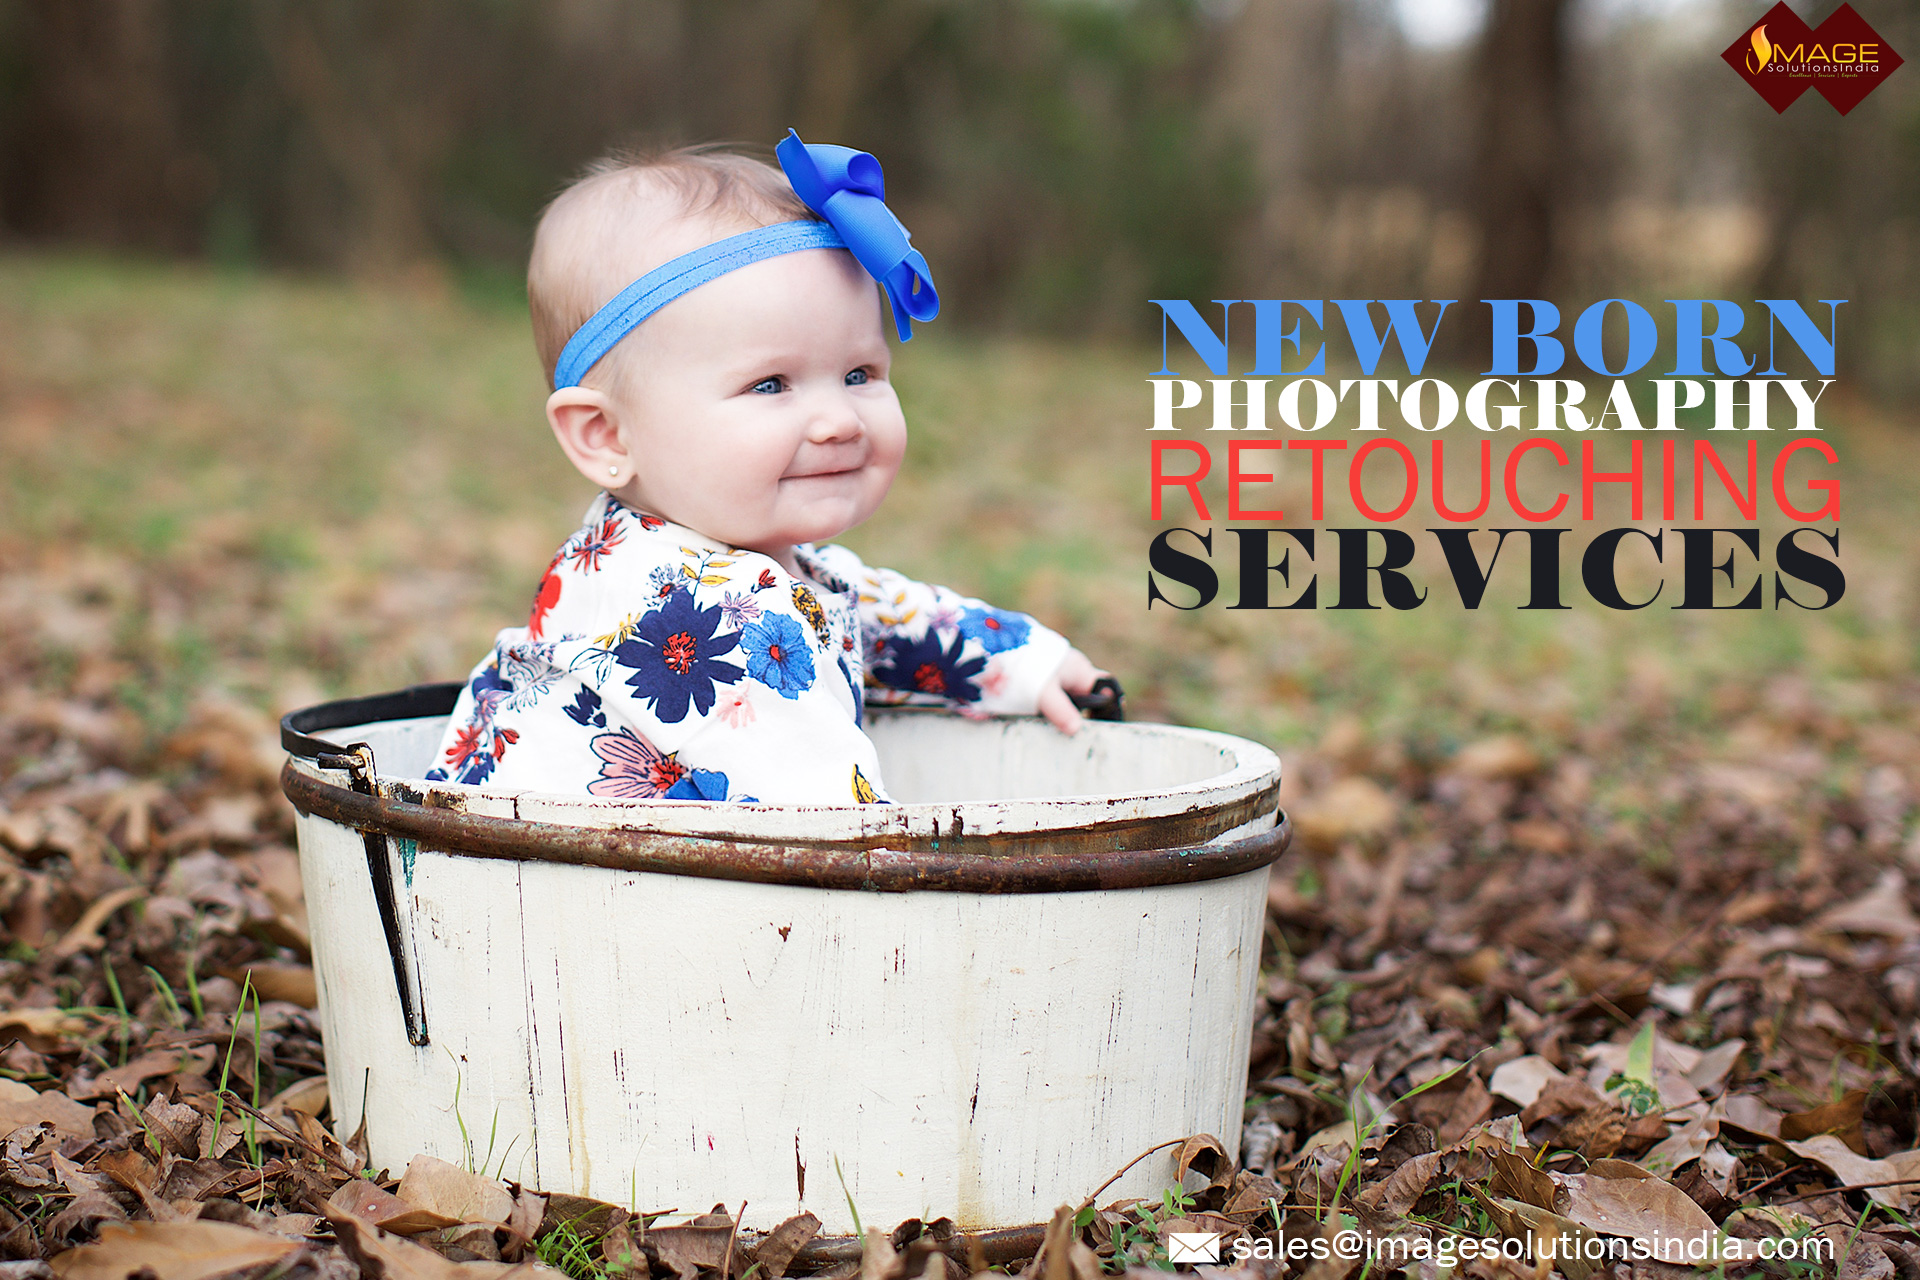 Photo Retouching Services for New born baby, Models, Family, Wedding and Portrait Photographers